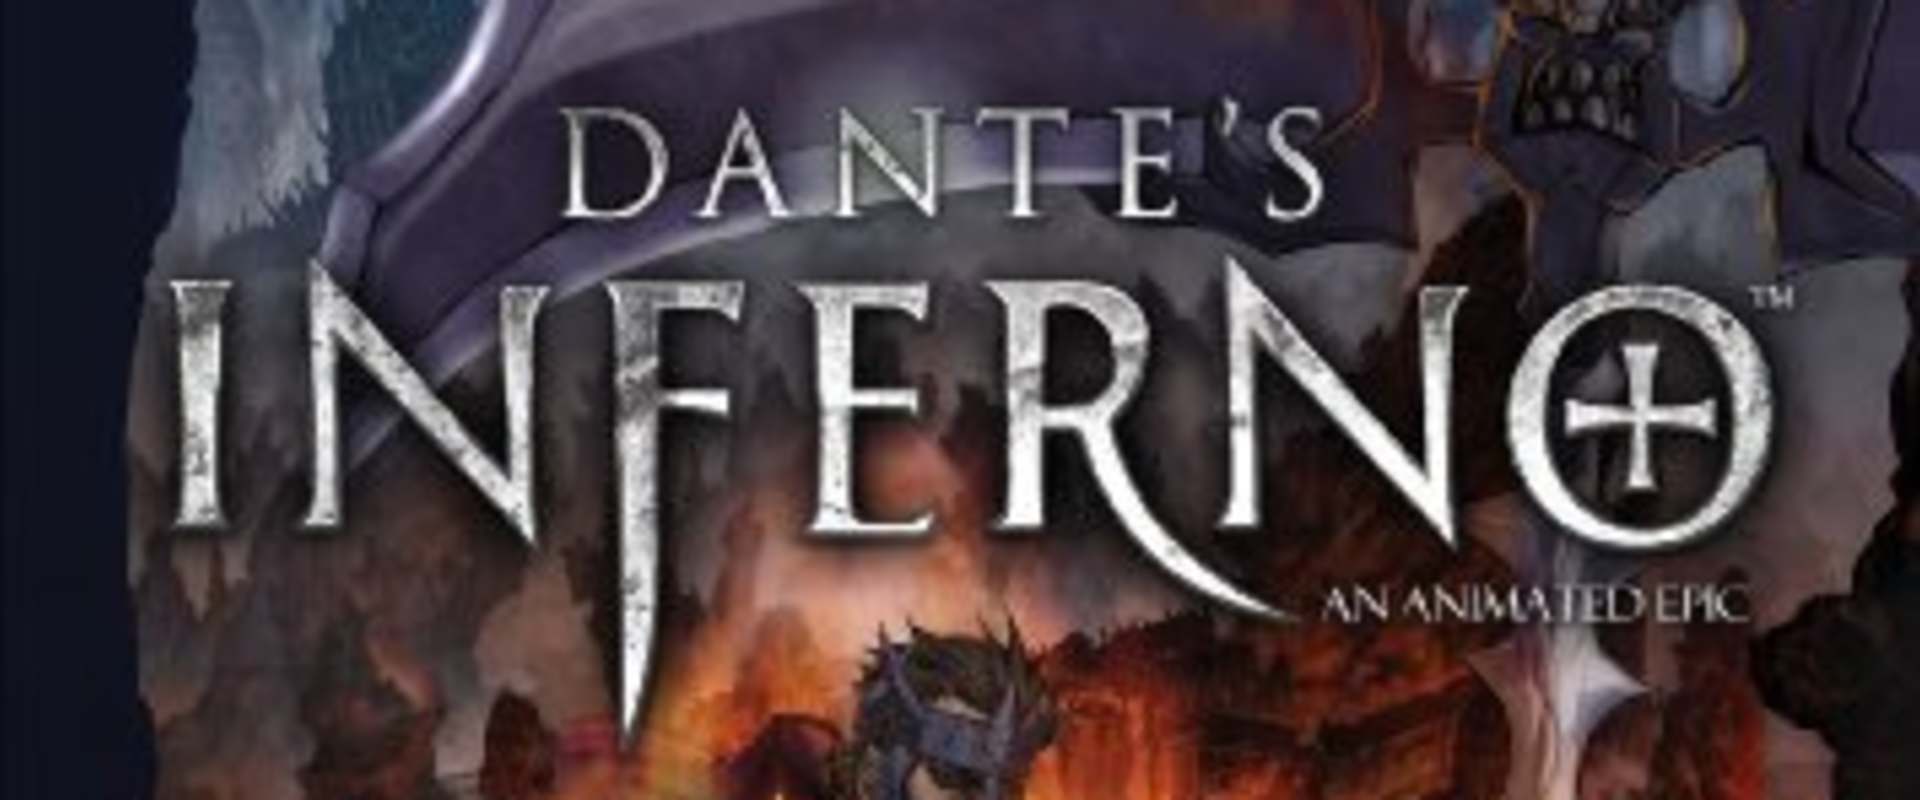 Dante's Inferno: An Animated Epic background 1